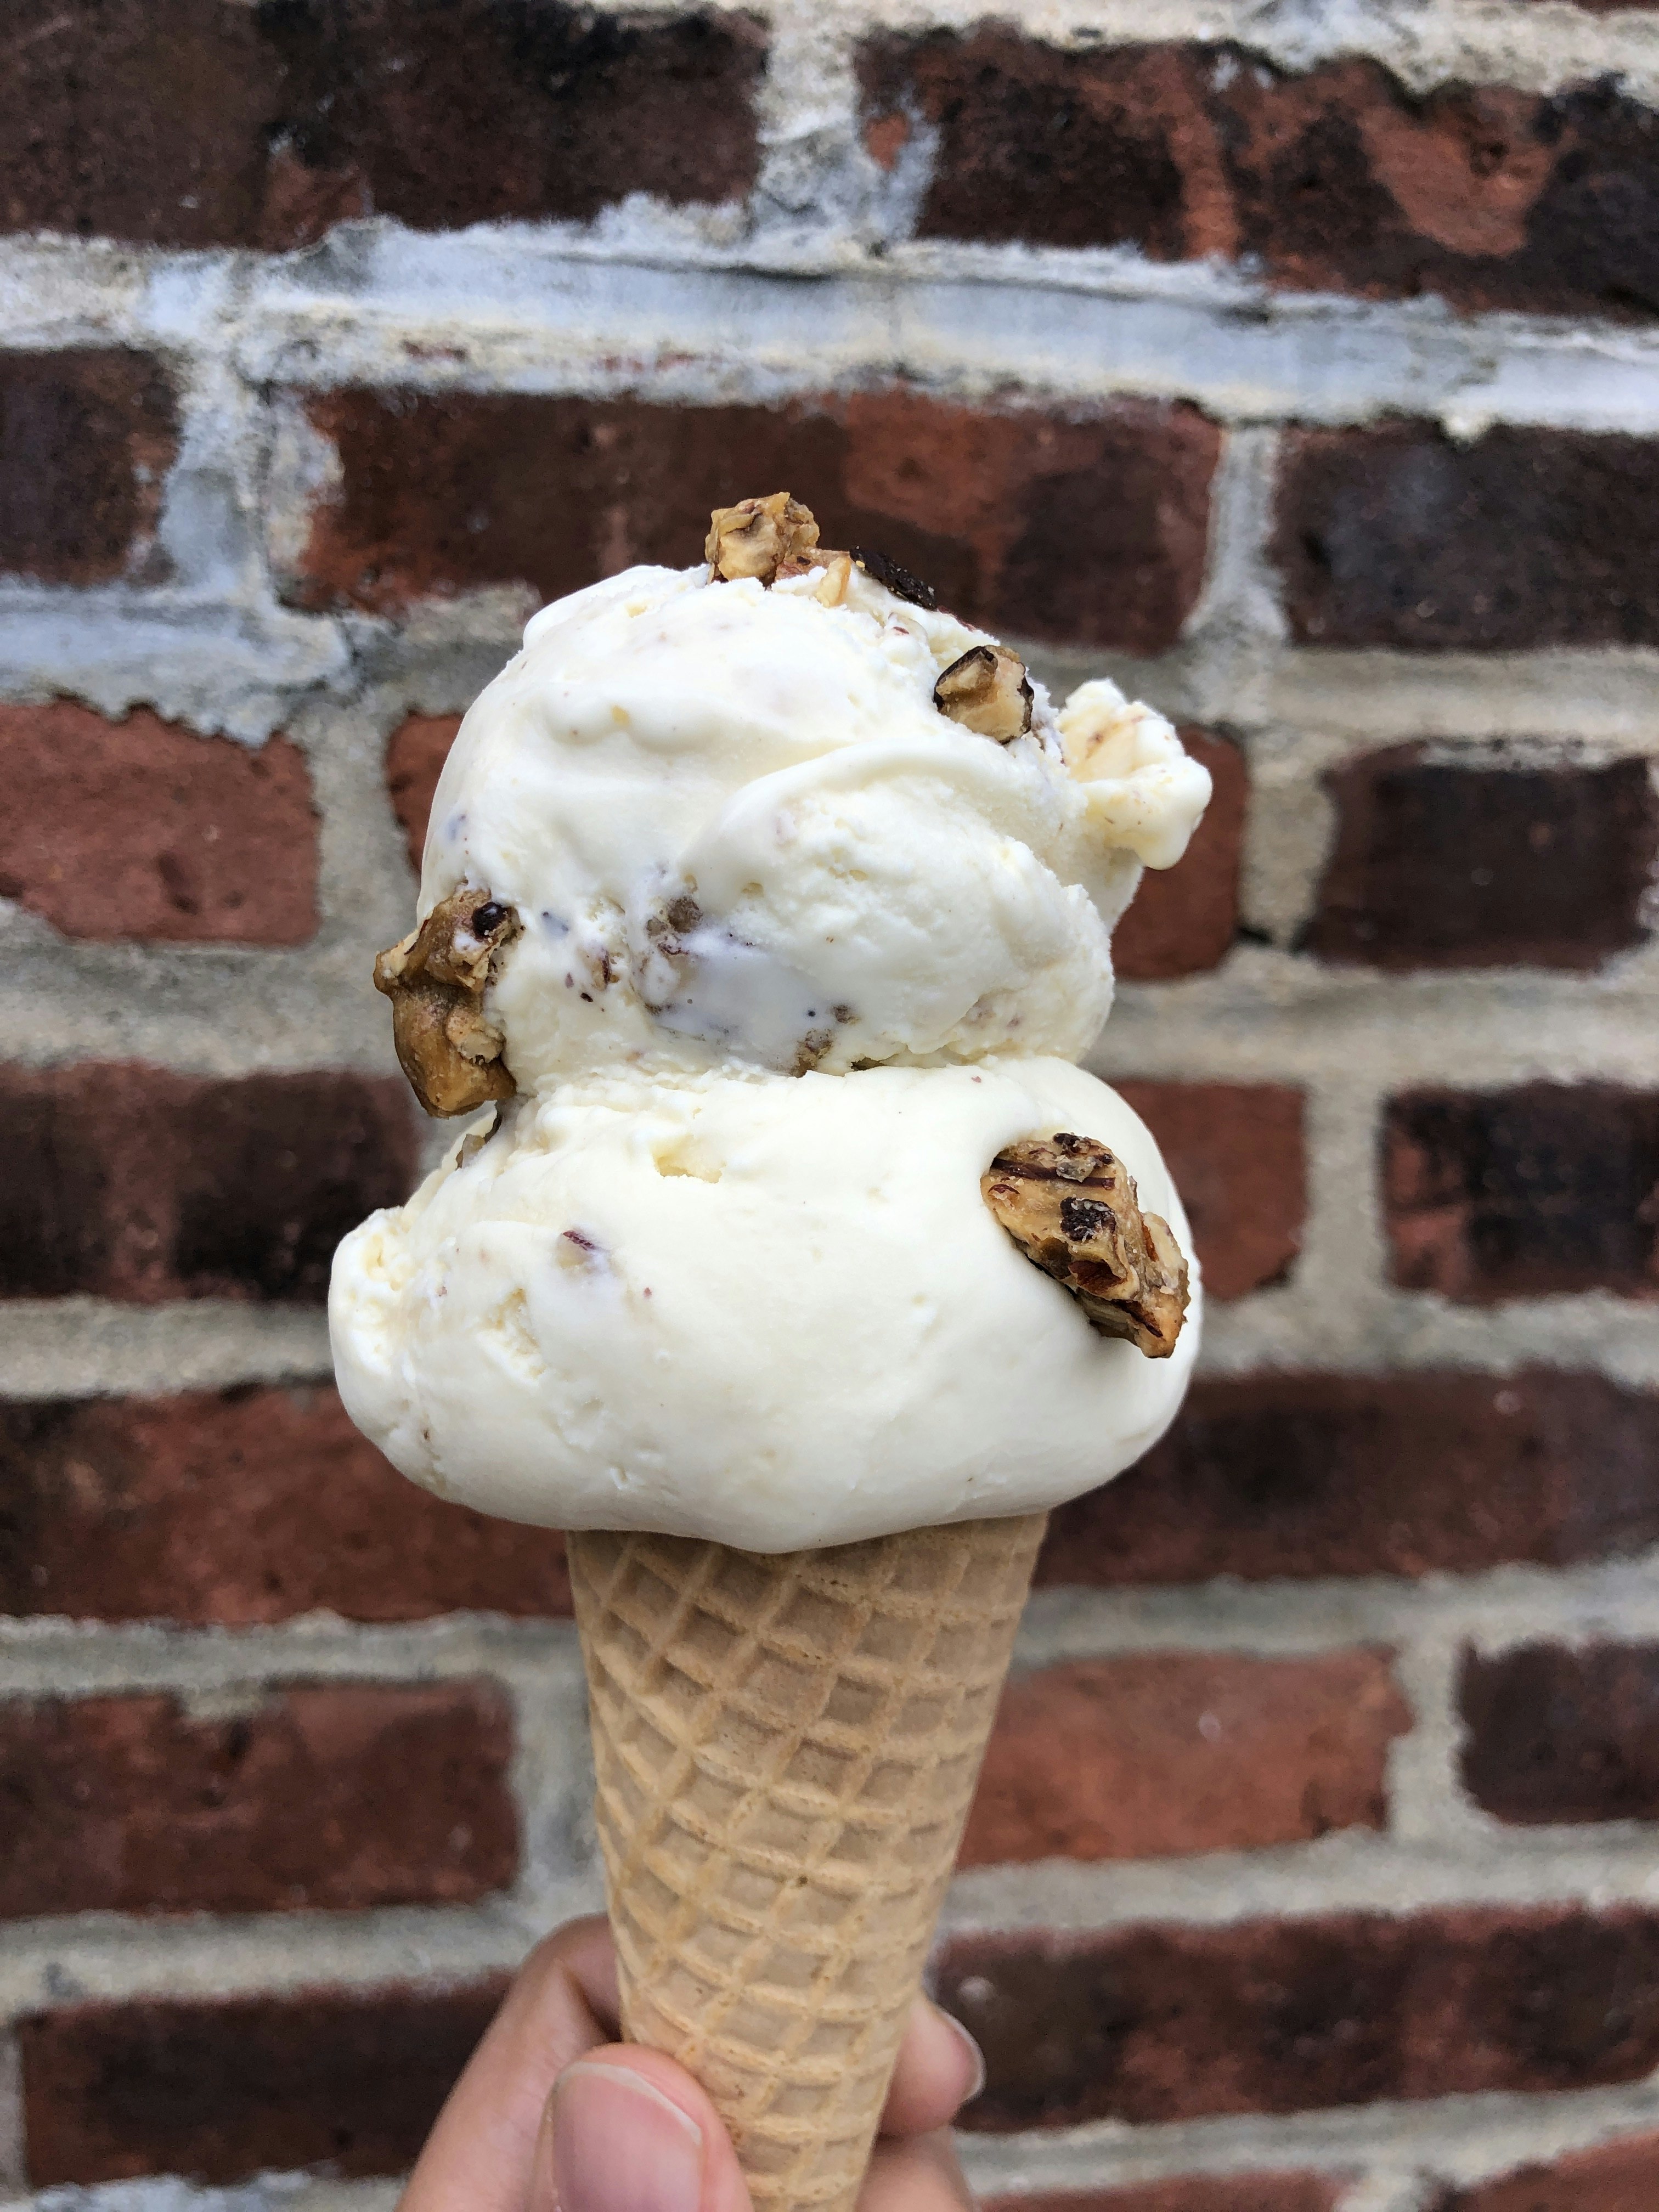 A two-scoop ice cream cone is held up against a brick background